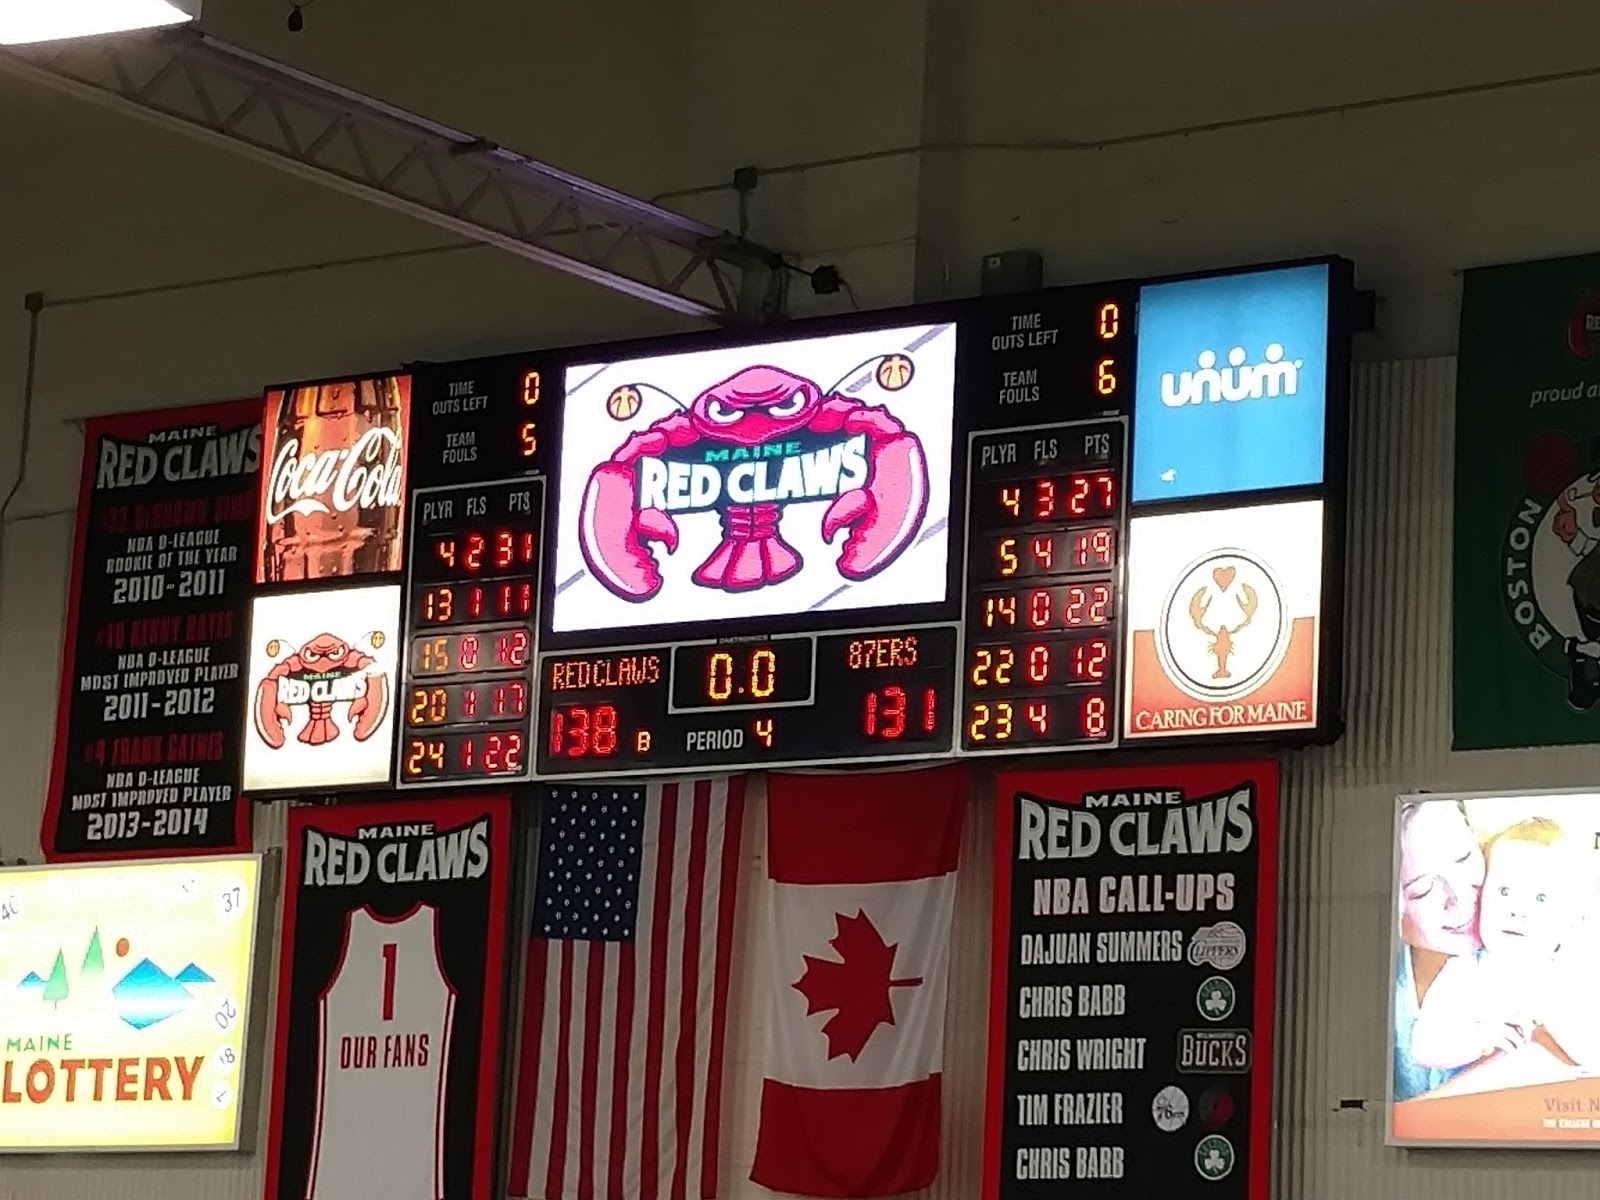 Sports Road Trips: Delaware 87ers 131 at Maine Red Claws 138 (NBA